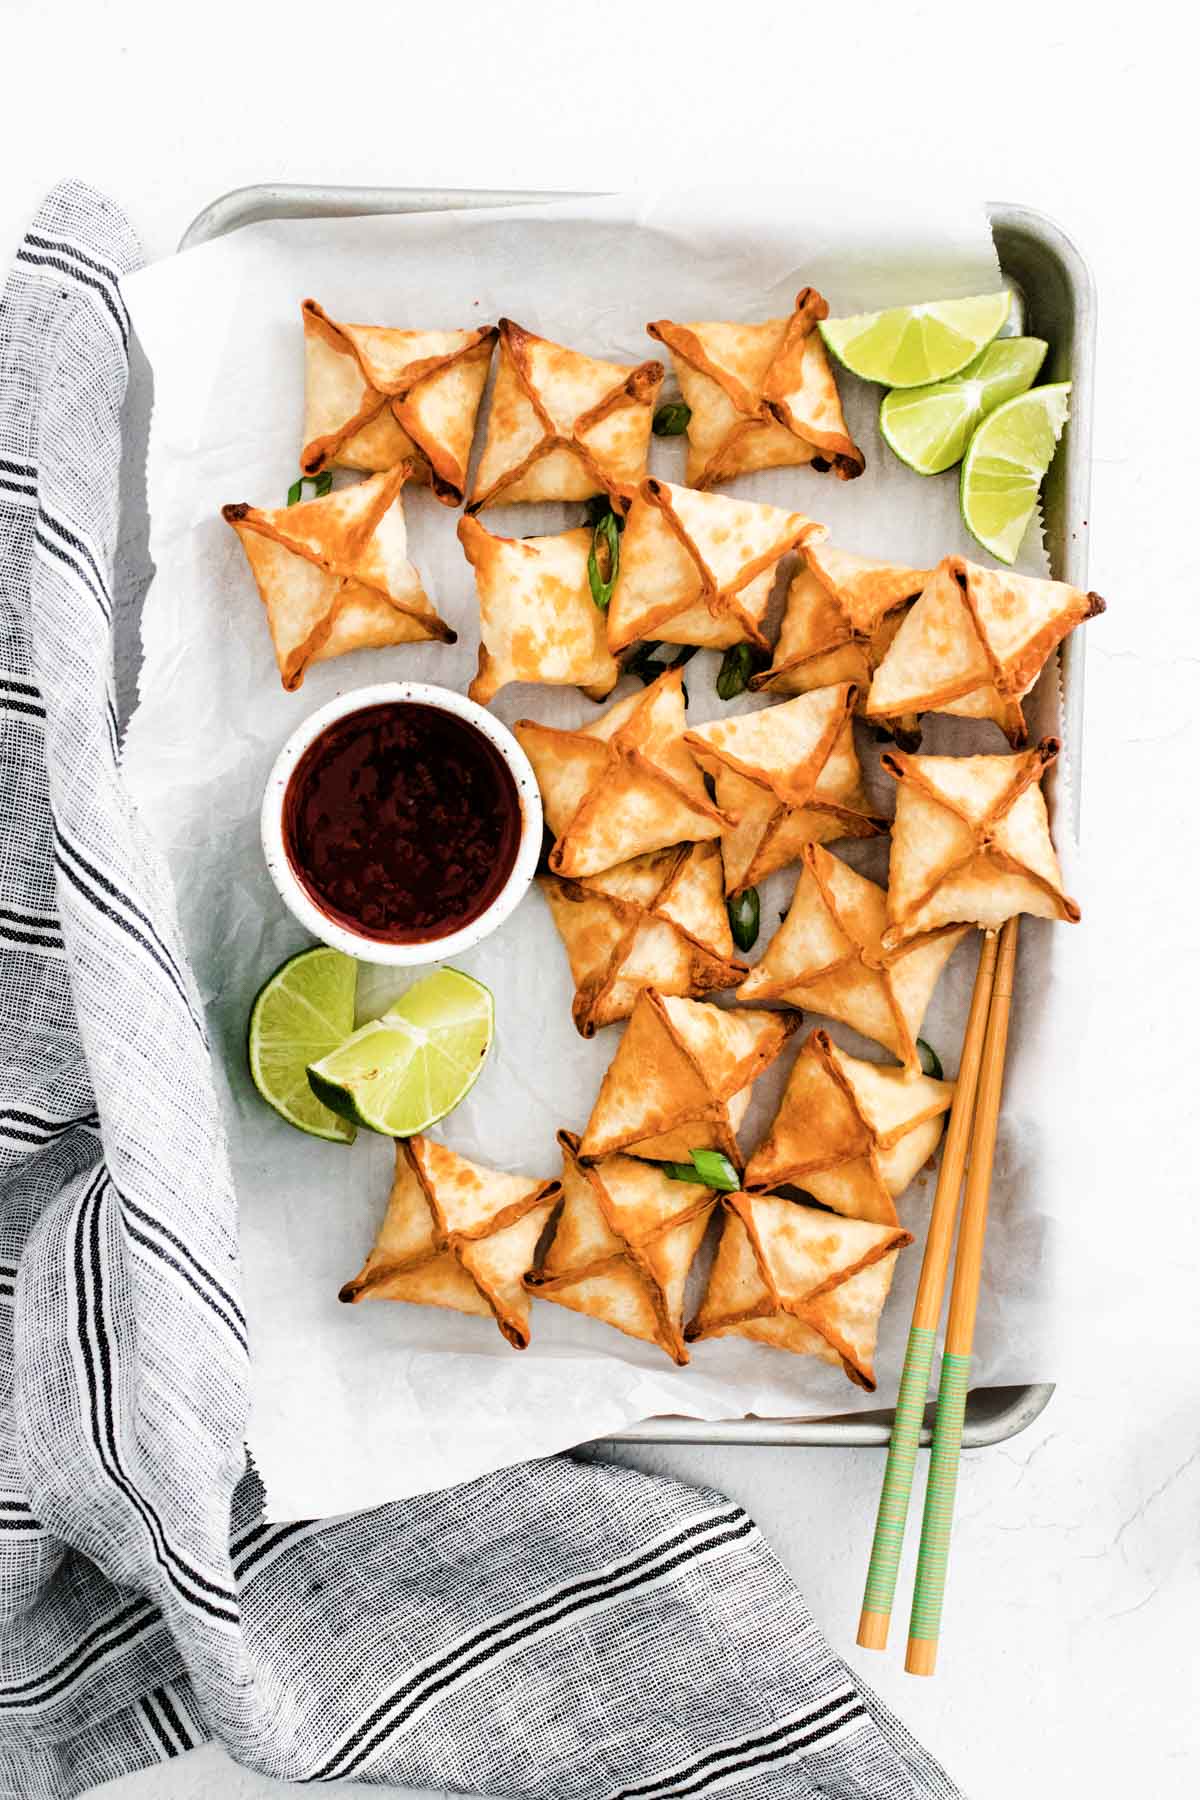 the finished crab rangoons air fryer recipe ready to serve